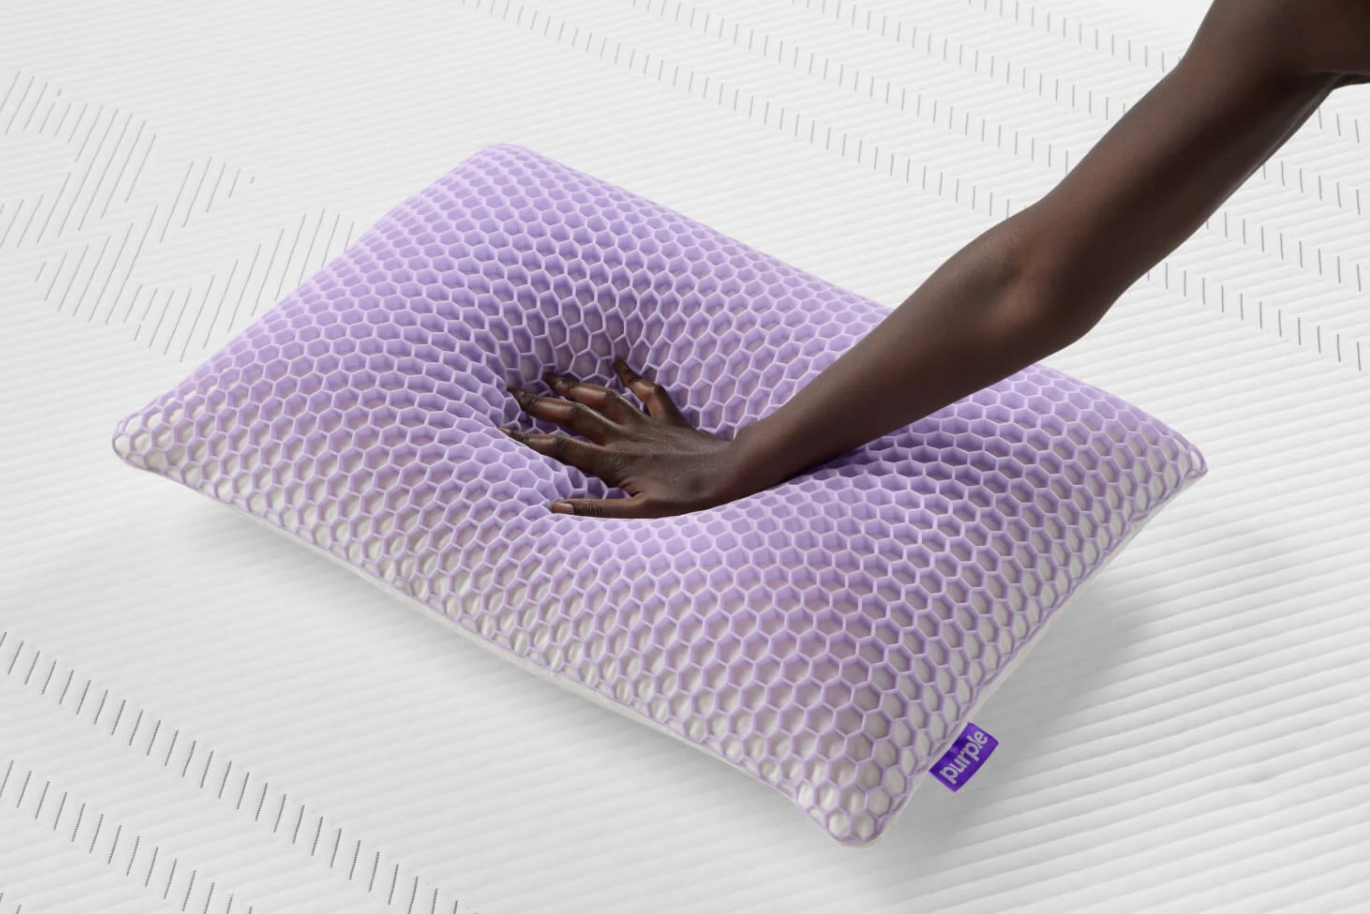 Purple harmony pillow 2, one of the best pillows for neck pain